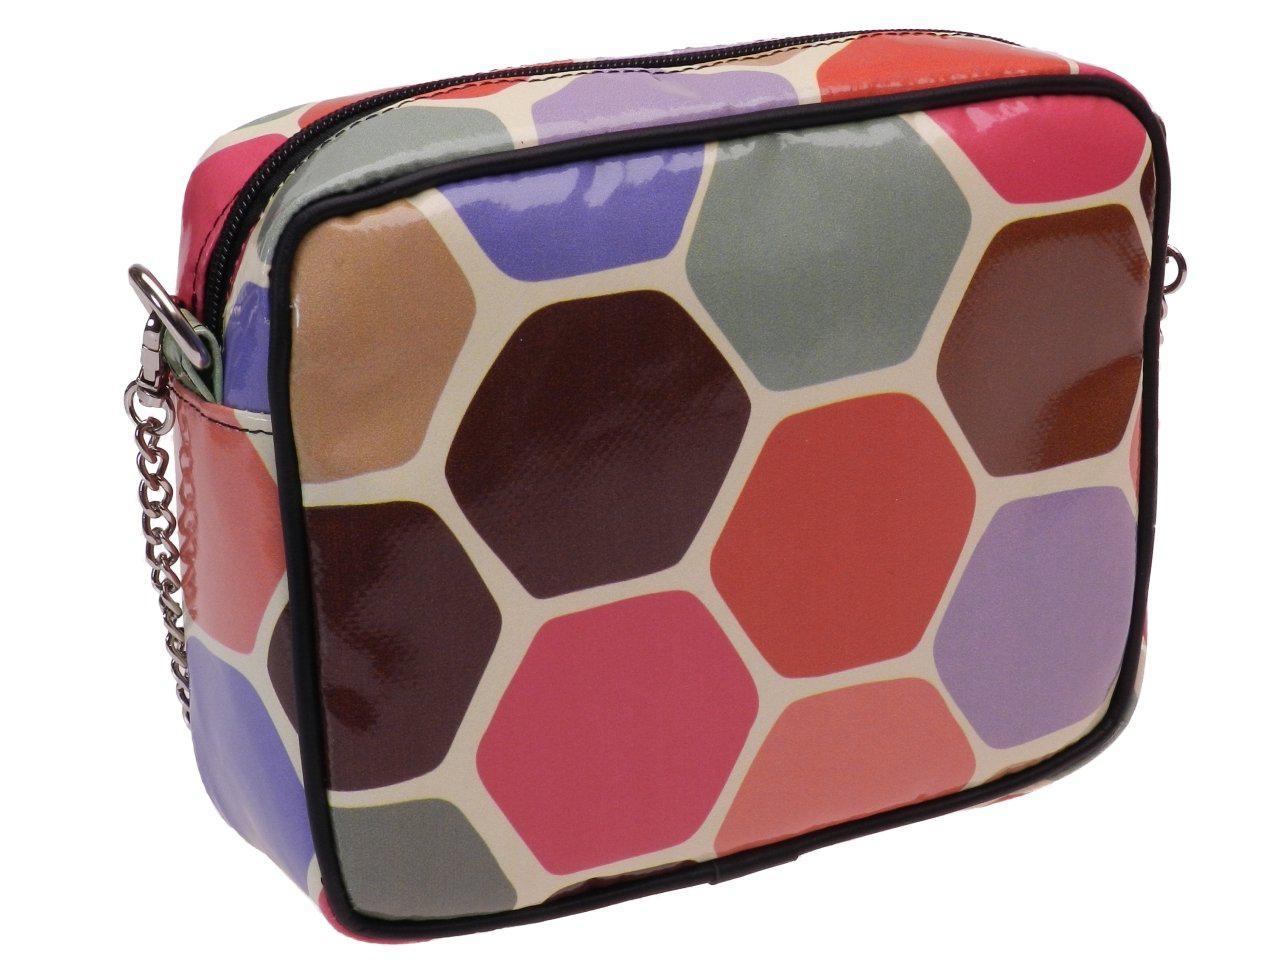 MULTICOLOUR CLUTCH WITH HEXAGON FANTASY. MODEL PARK MADE OF LORRY TARPAULIN. - Limited Edition Paul Meccanico